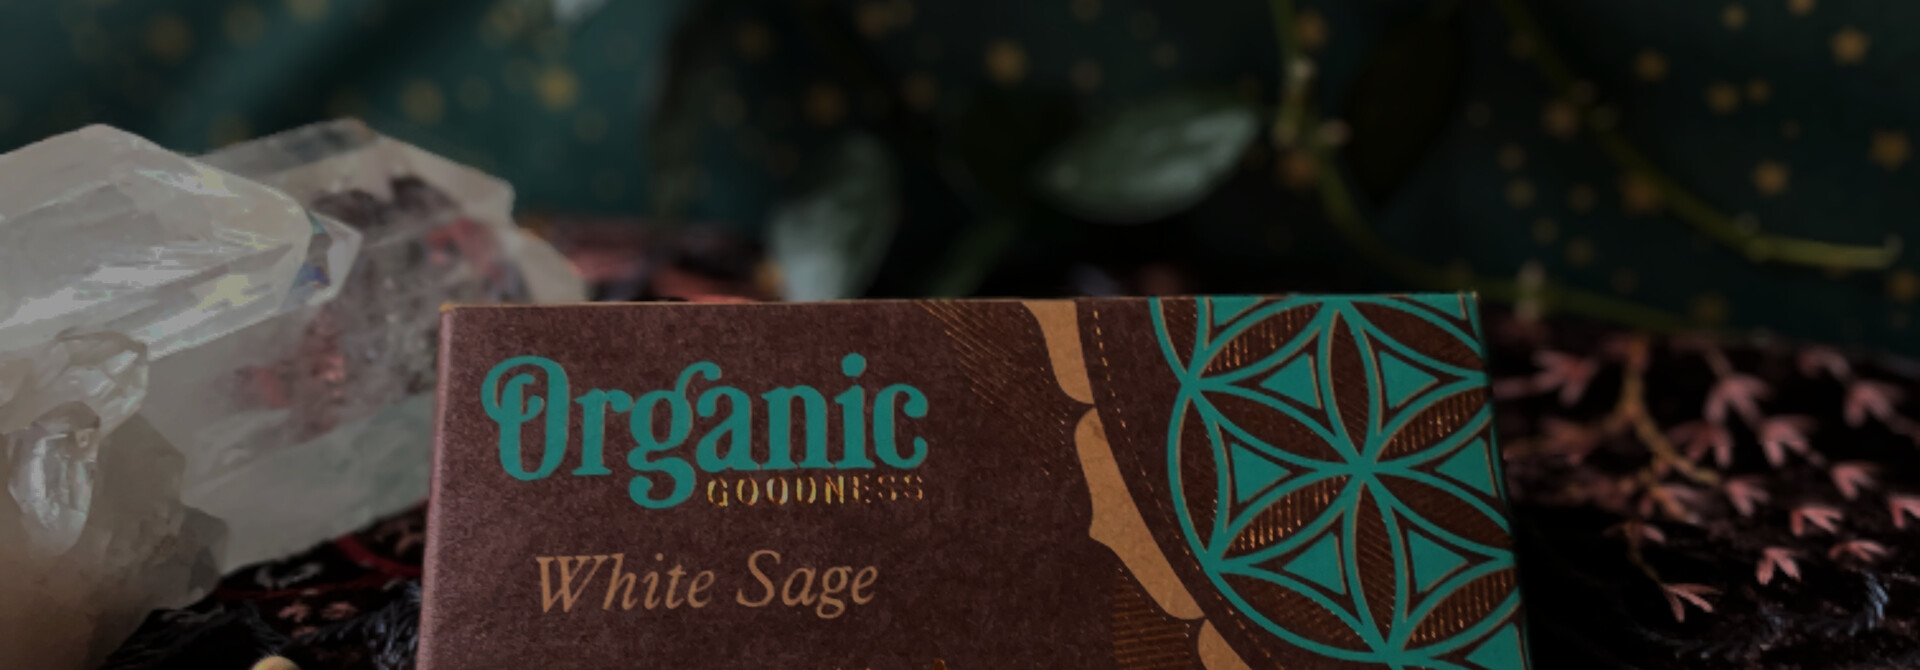 Organic Goodness Backflow Incense Cones White Sage